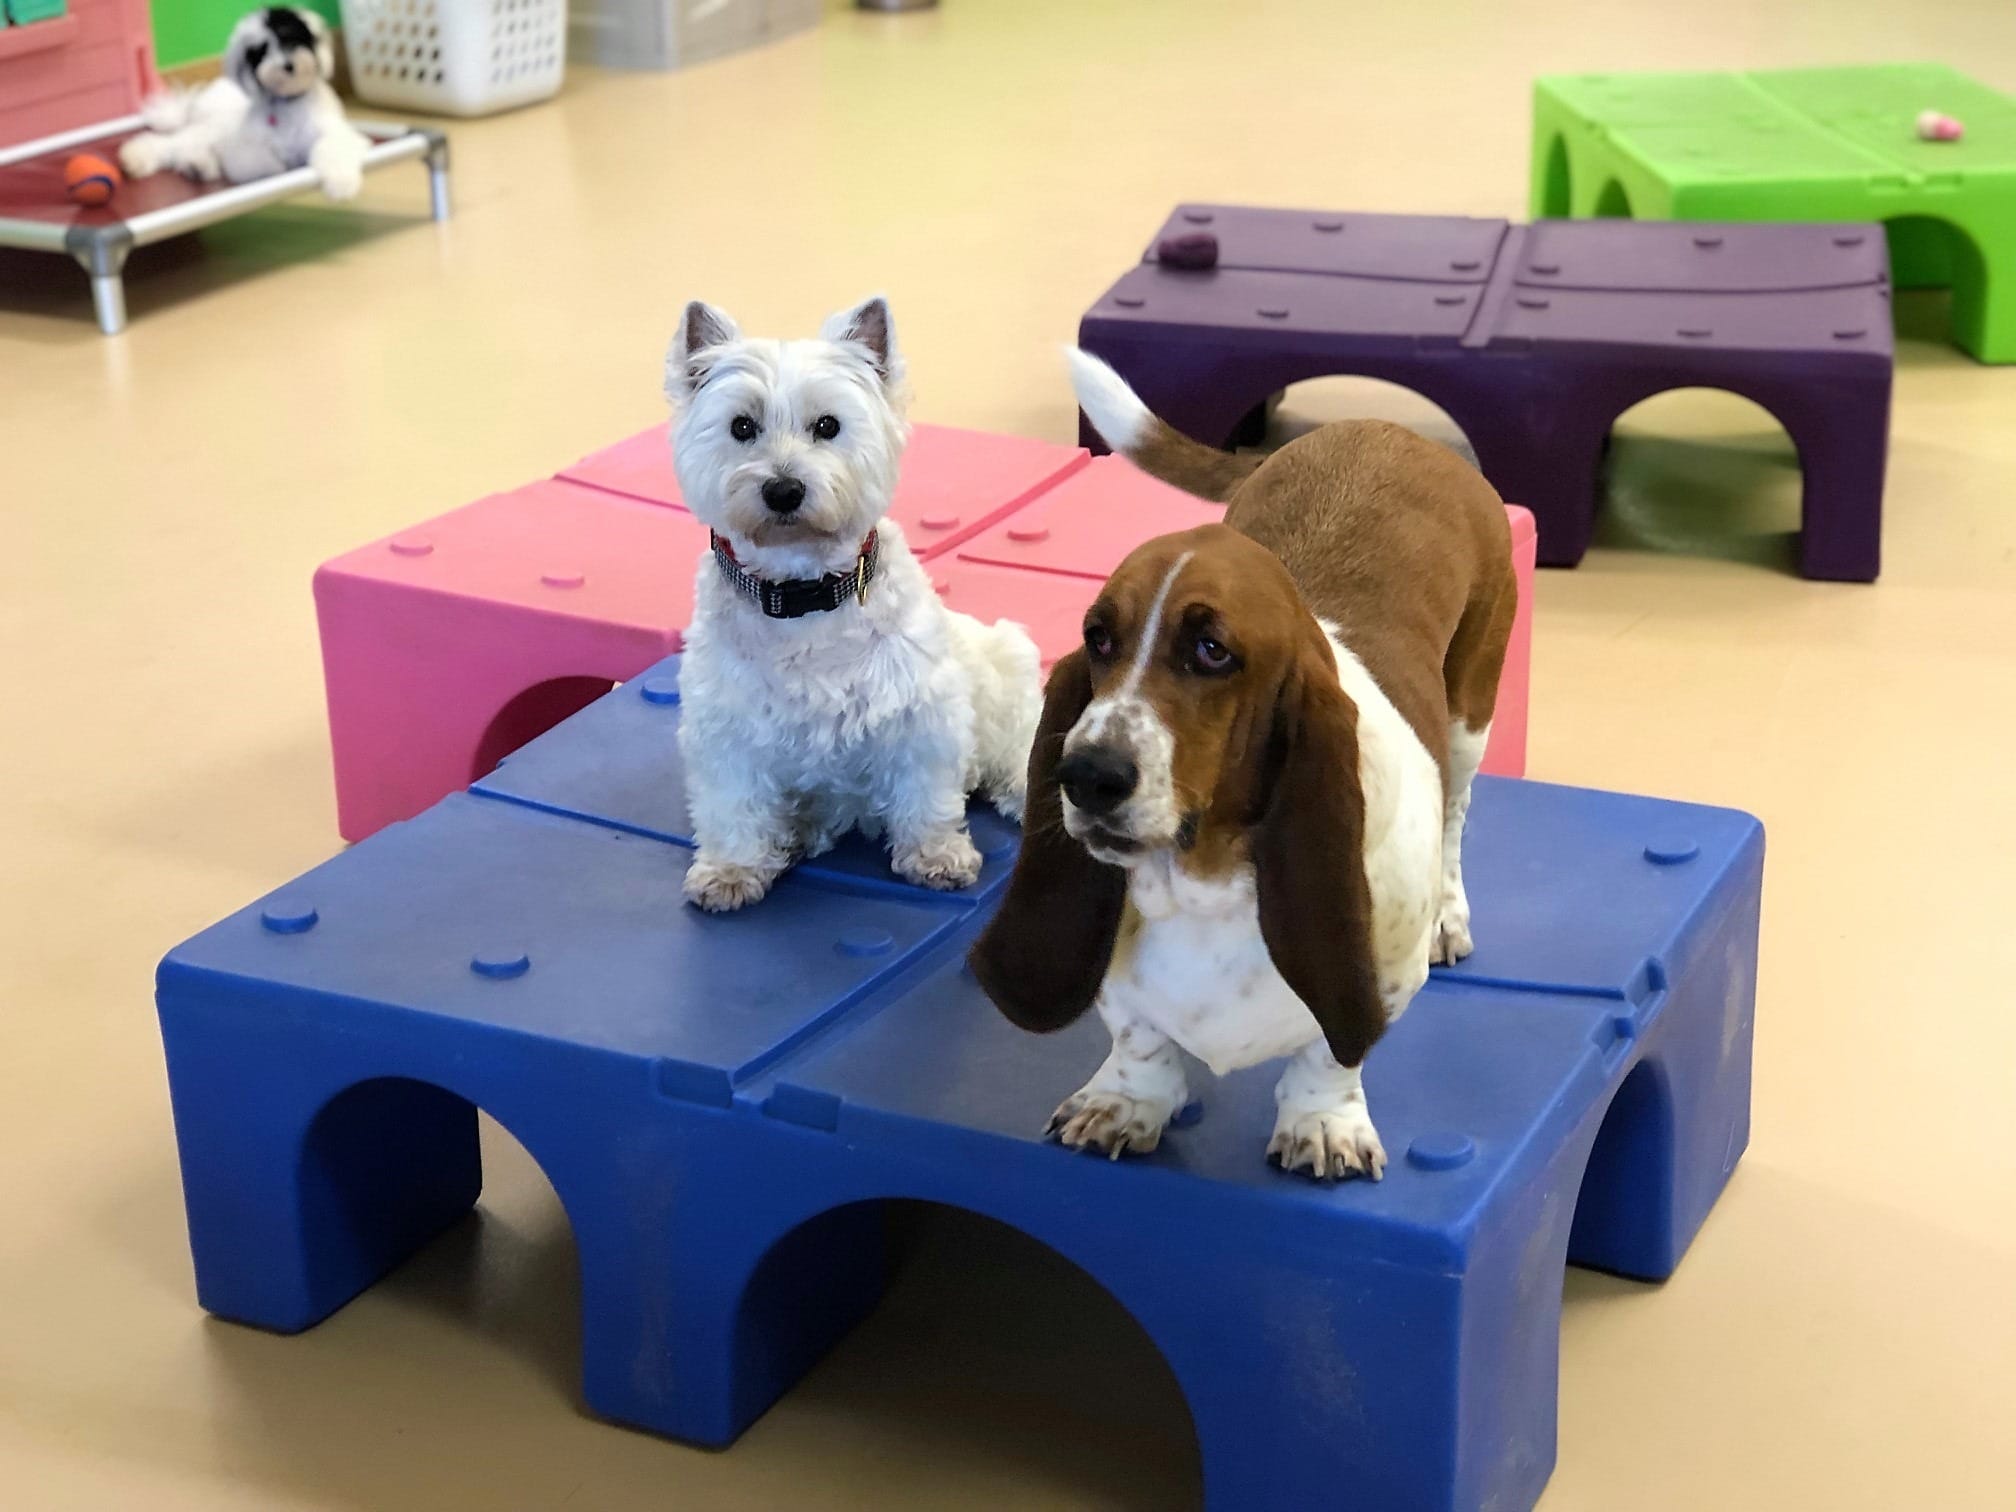 A Westie and Basset Hound play together on a plastic cube at the indoor doggy care space at the Wayzata location of Augusta Dog Training.